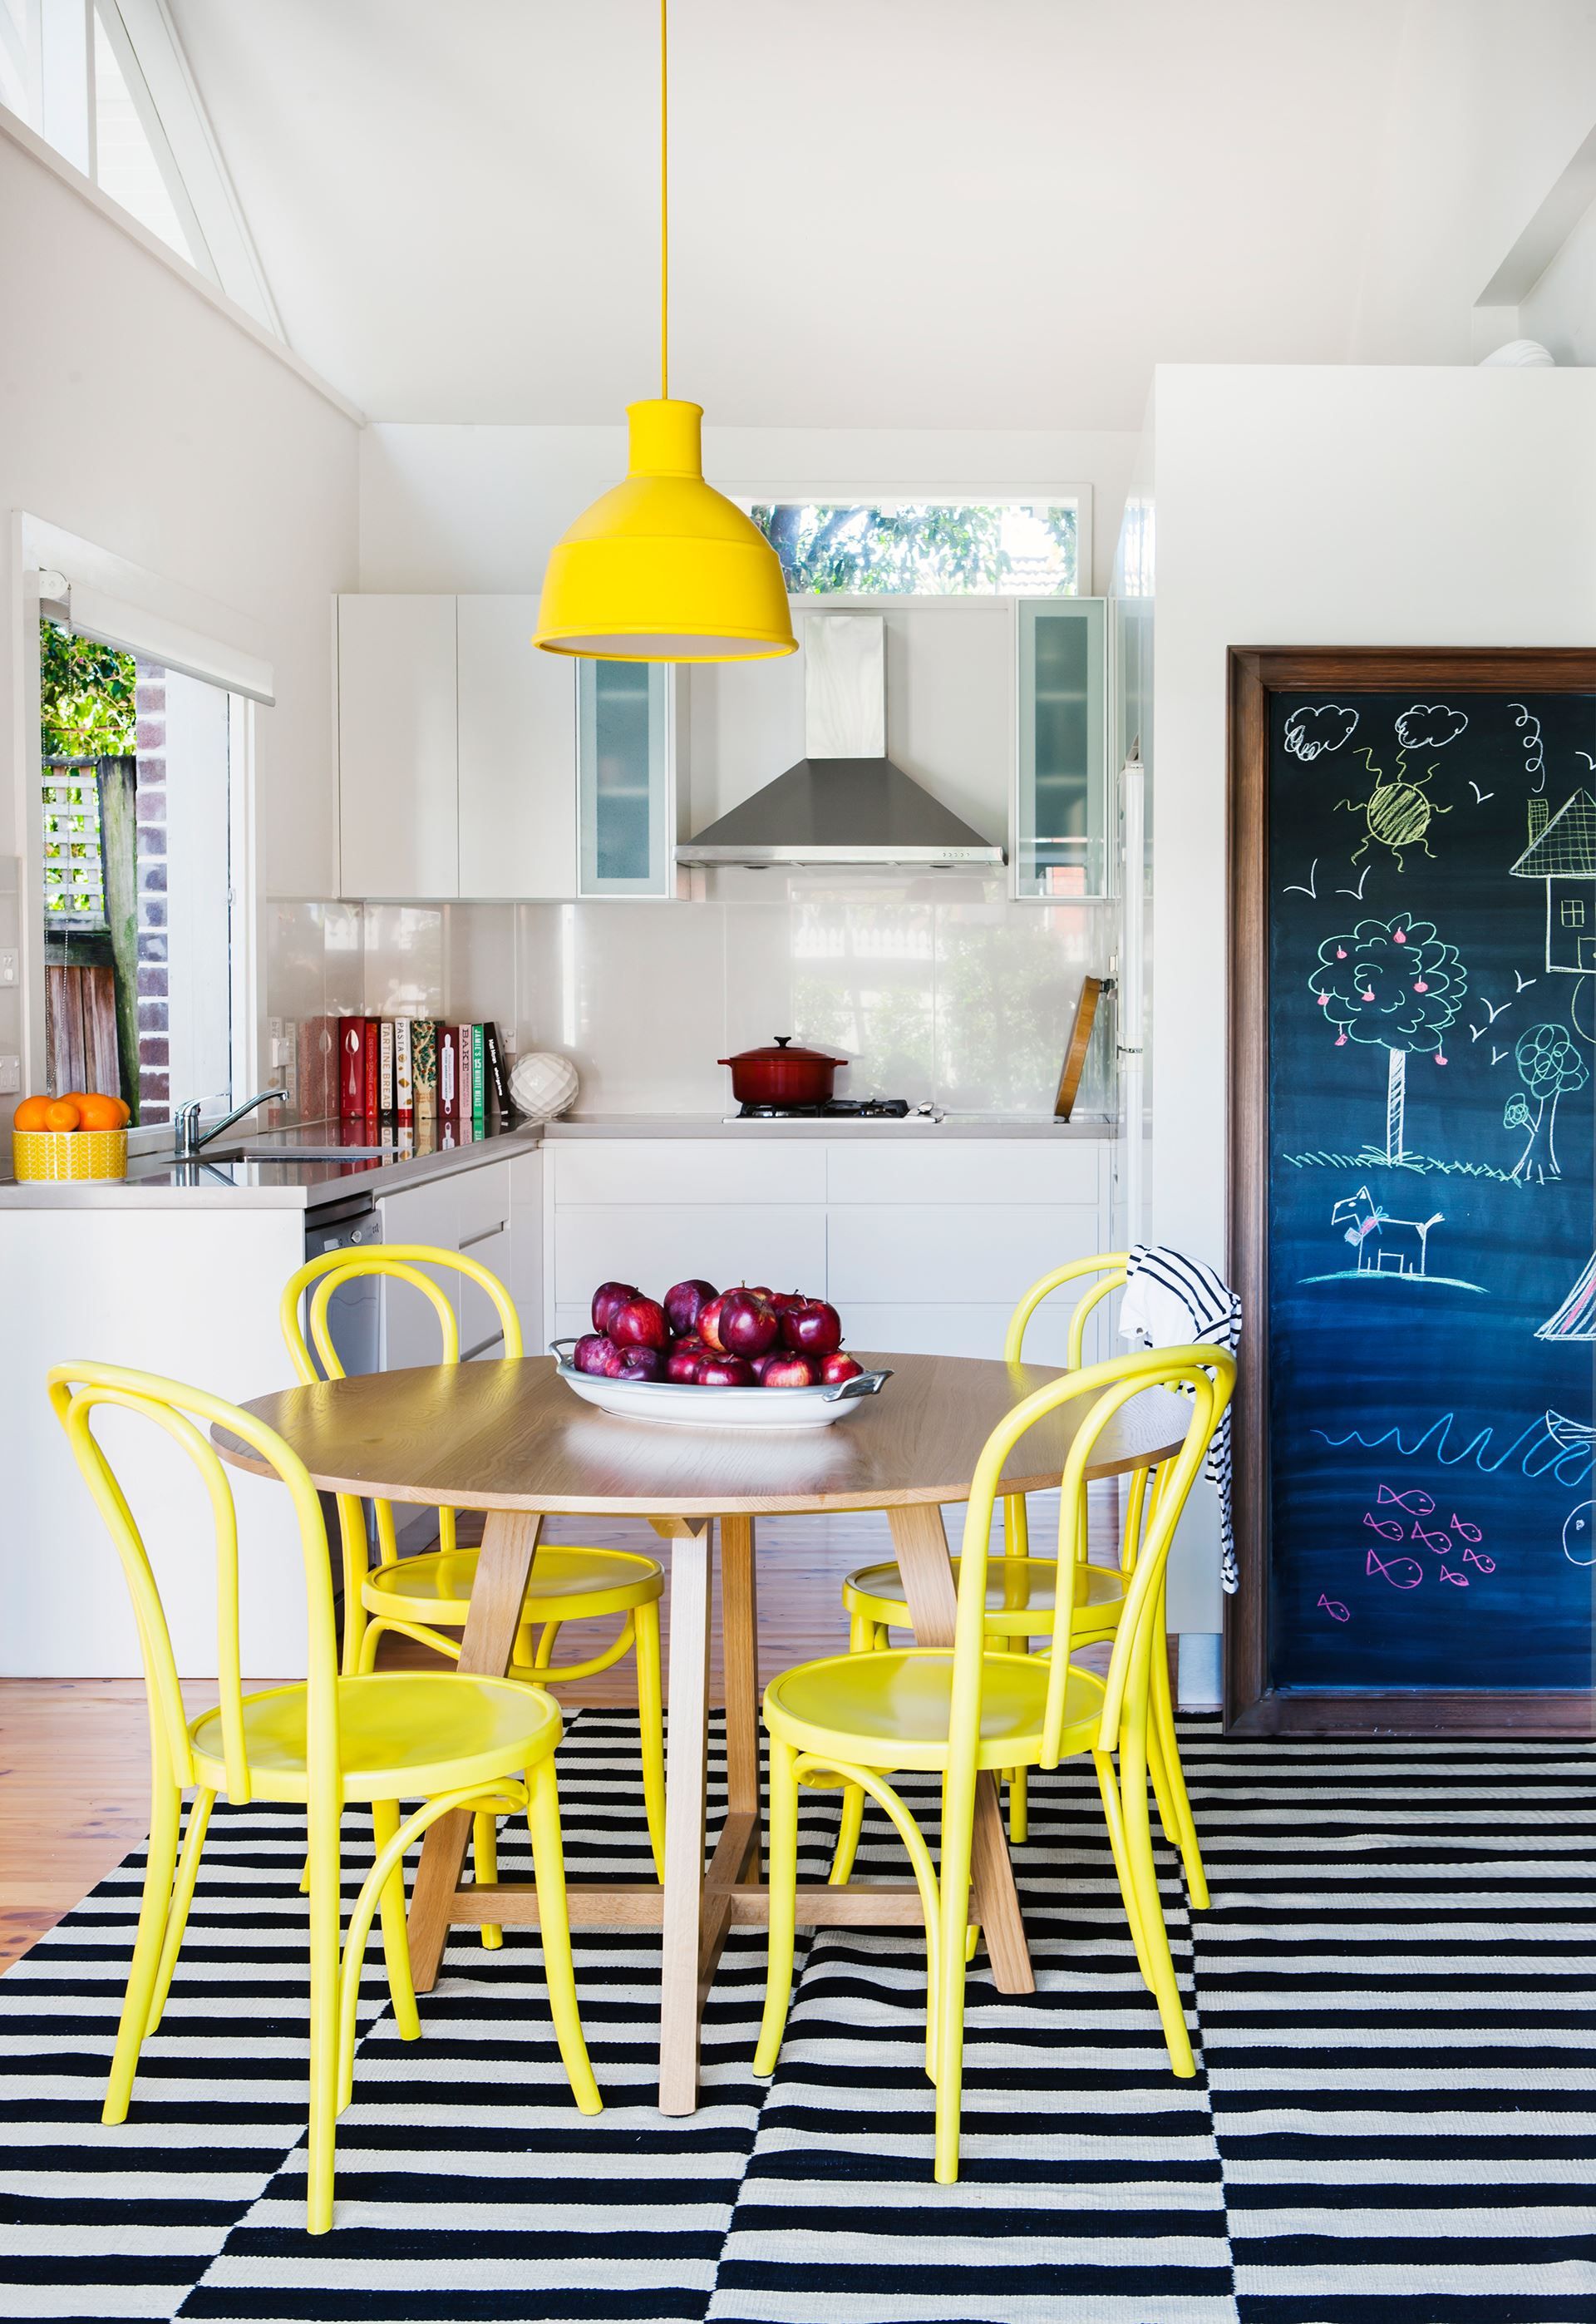 dining room, woode floor, black white striped rug, white kitchen cabinet, white wall, round table, yellow chairs, yellow pendant